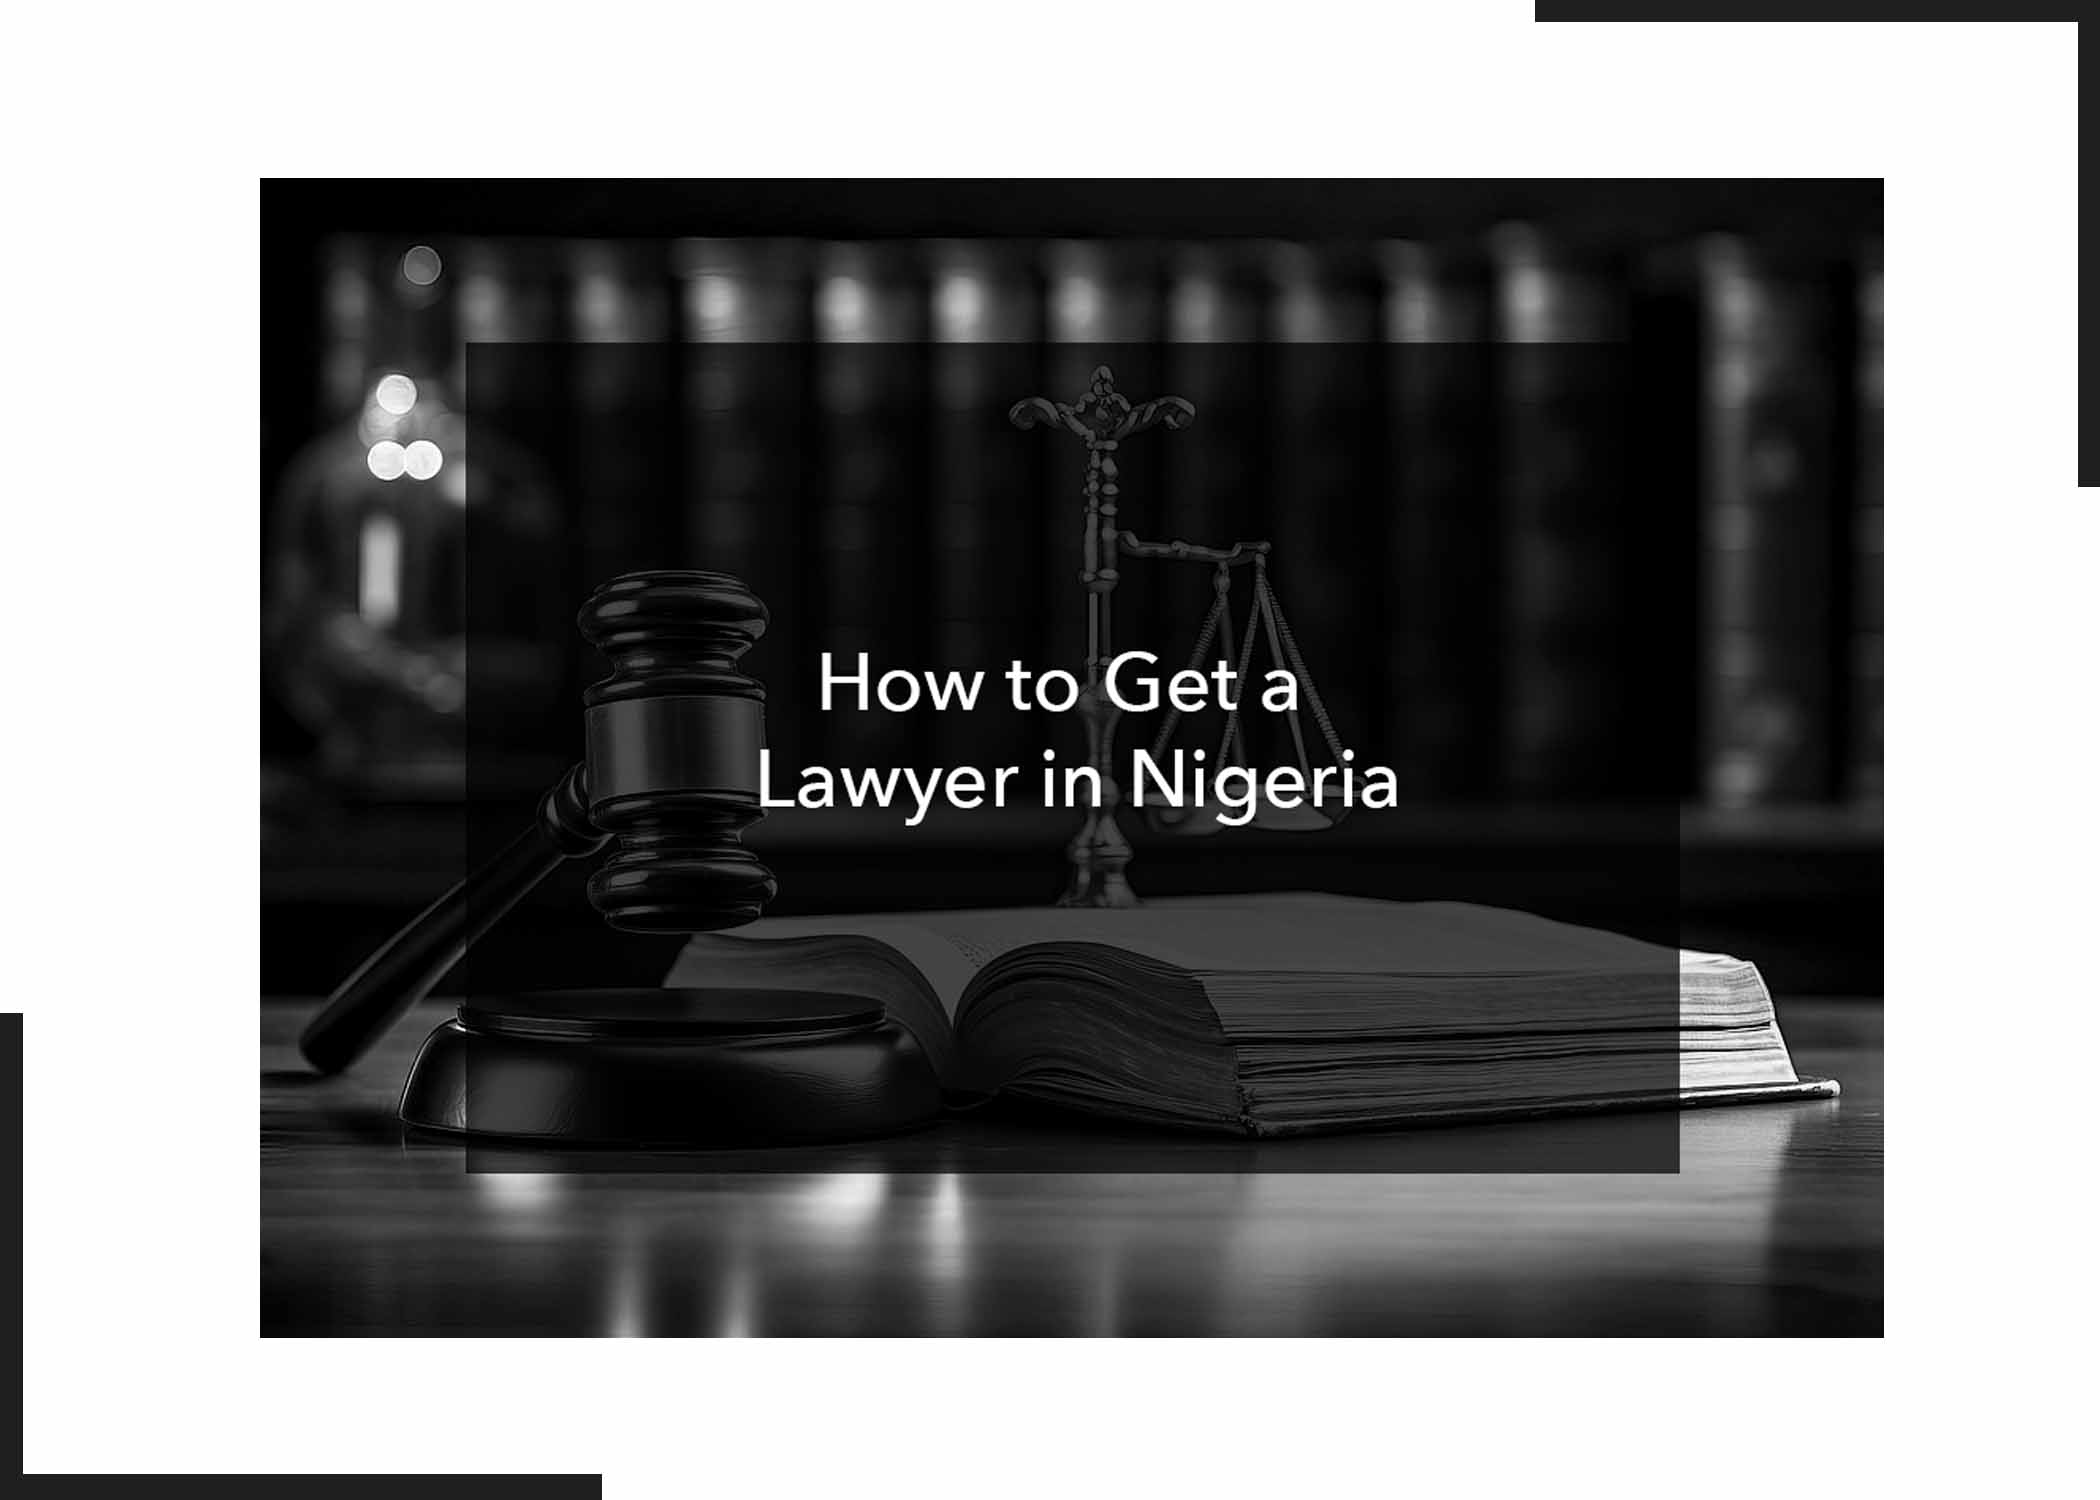 How to Get a Lawyer in Nigeria